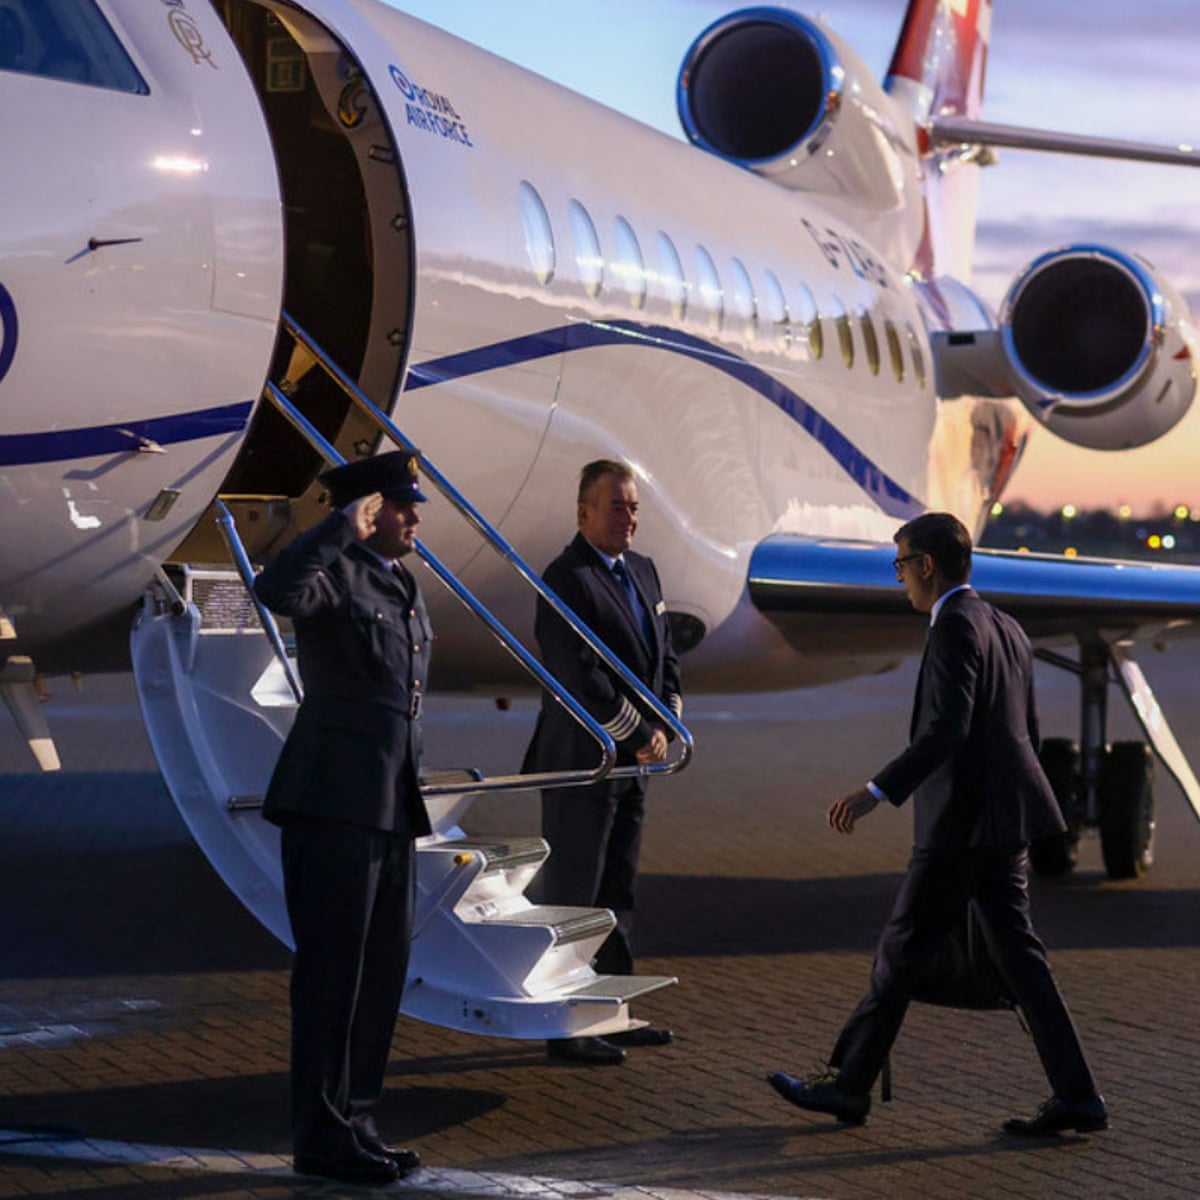 Flying shame: the scandalous rise of private jets